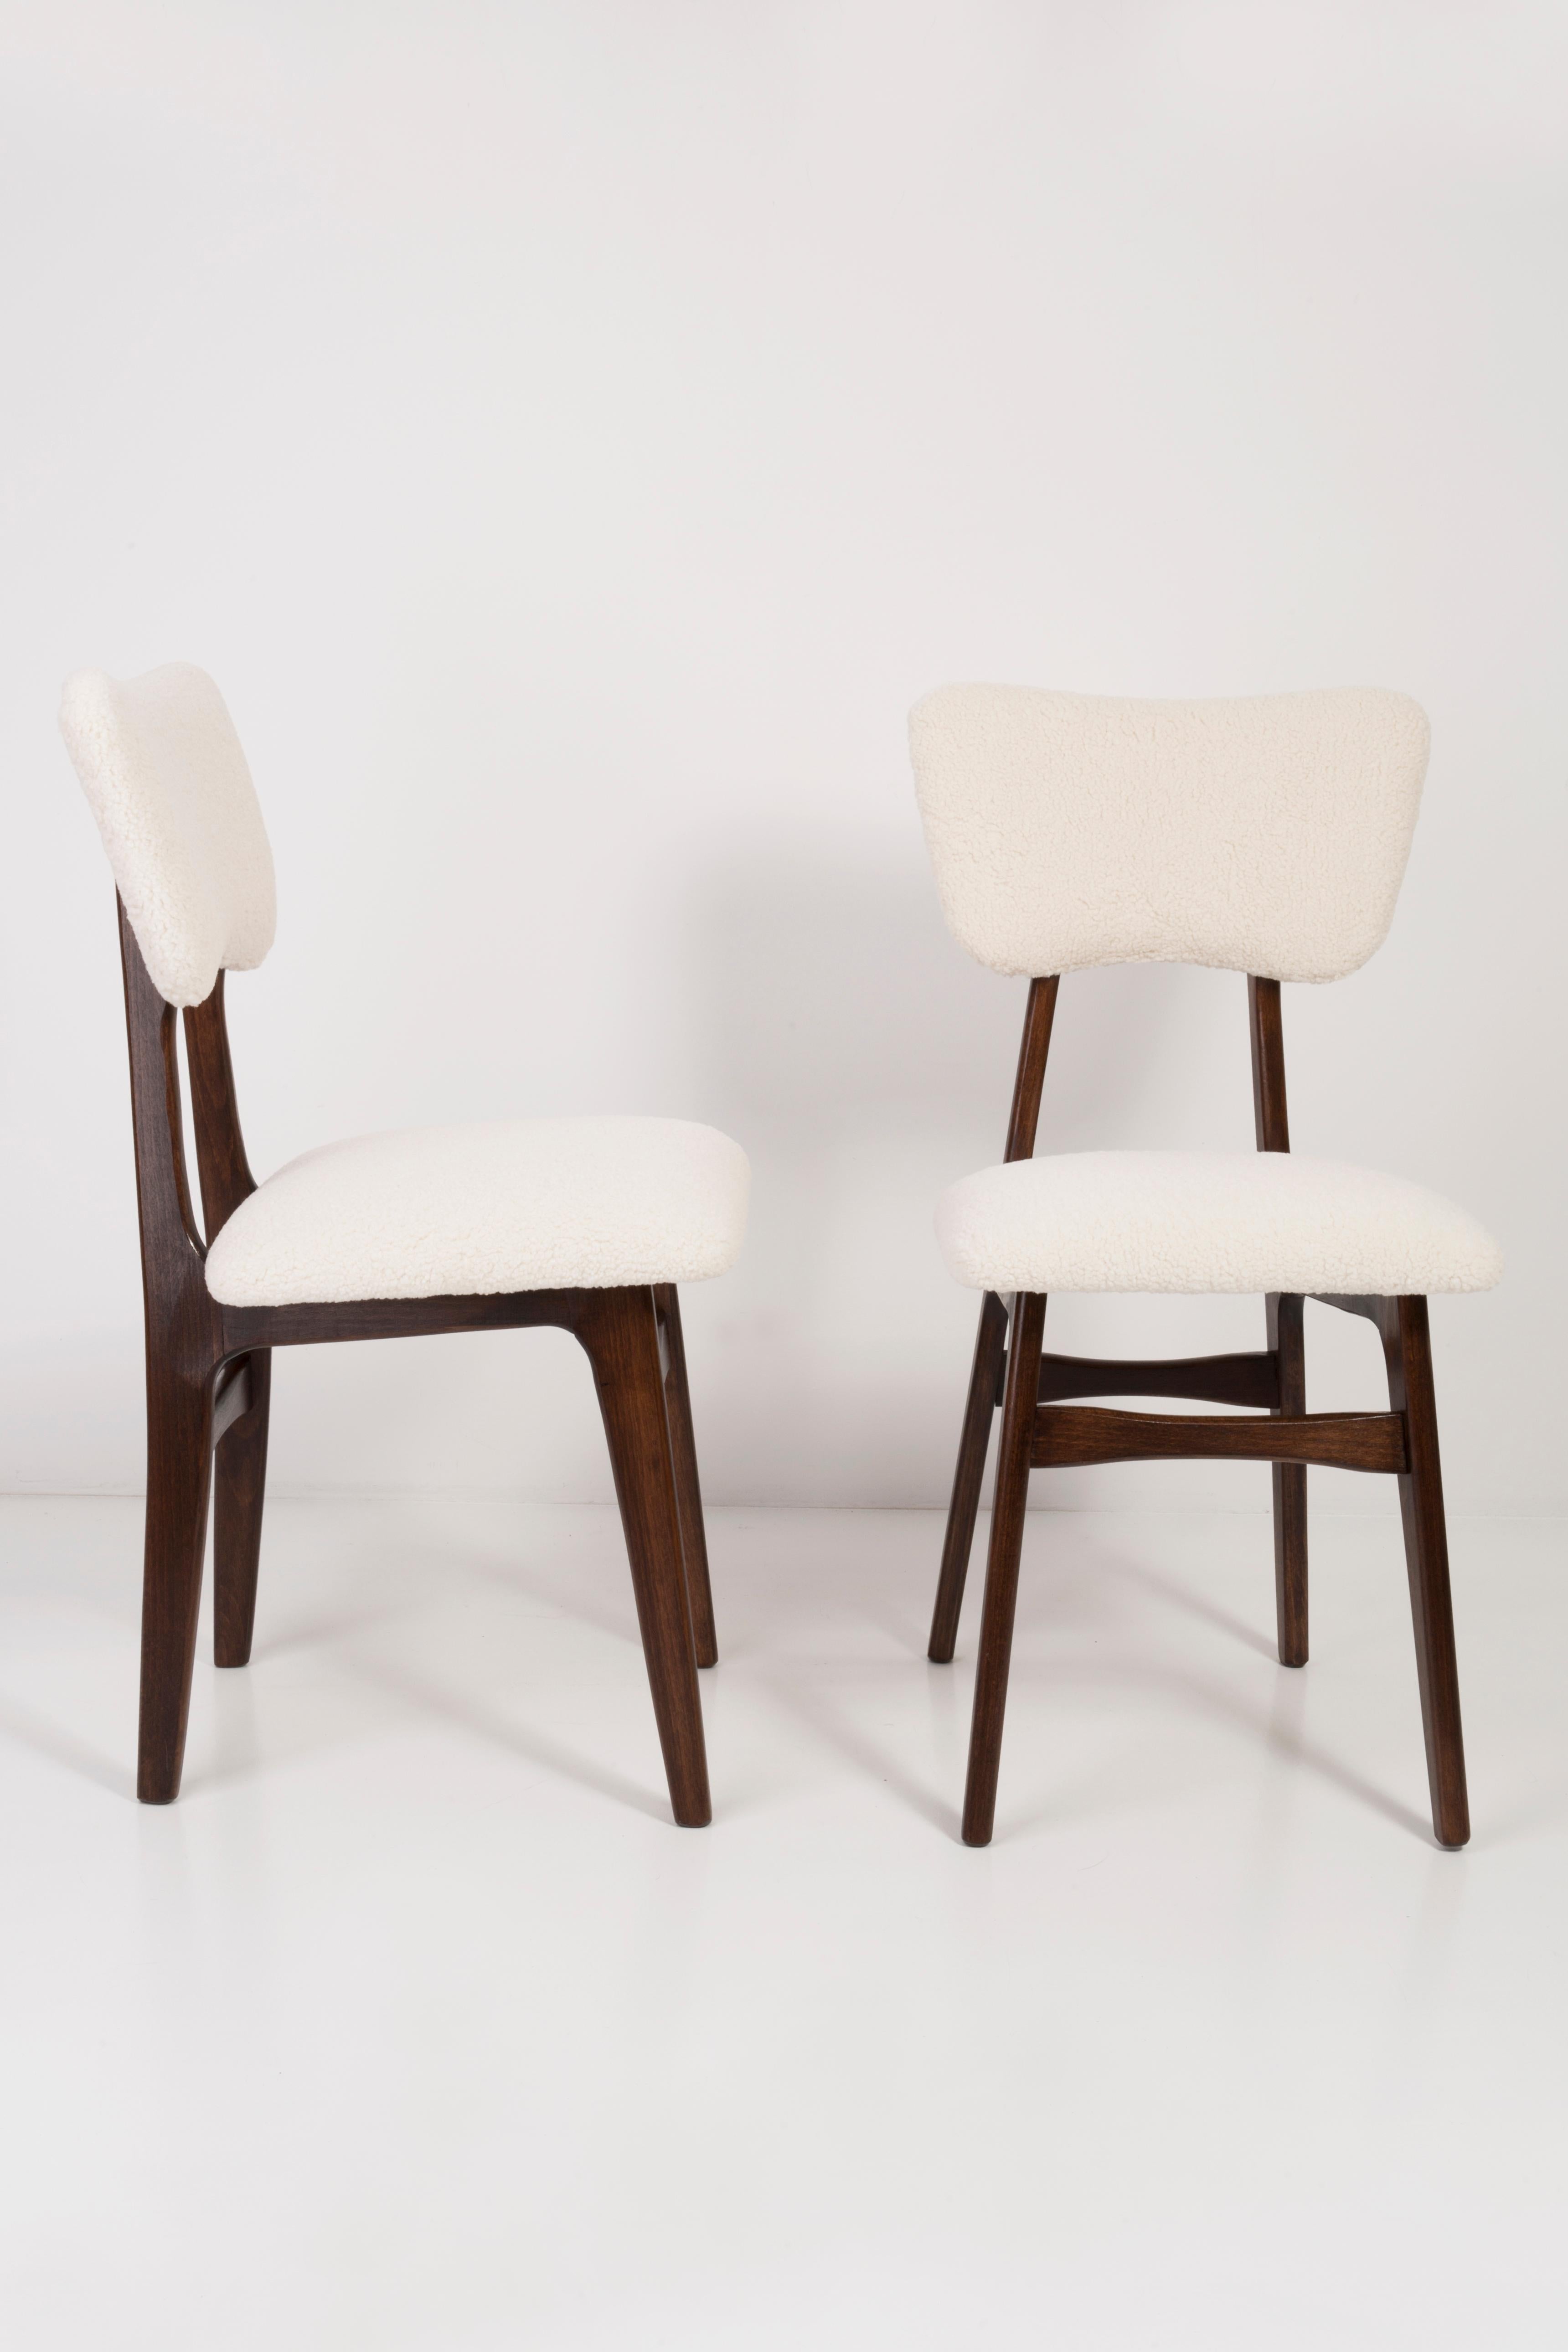 Set of Four 20th Century Light Crème Boucle Chairs, 1960s For Sale 5